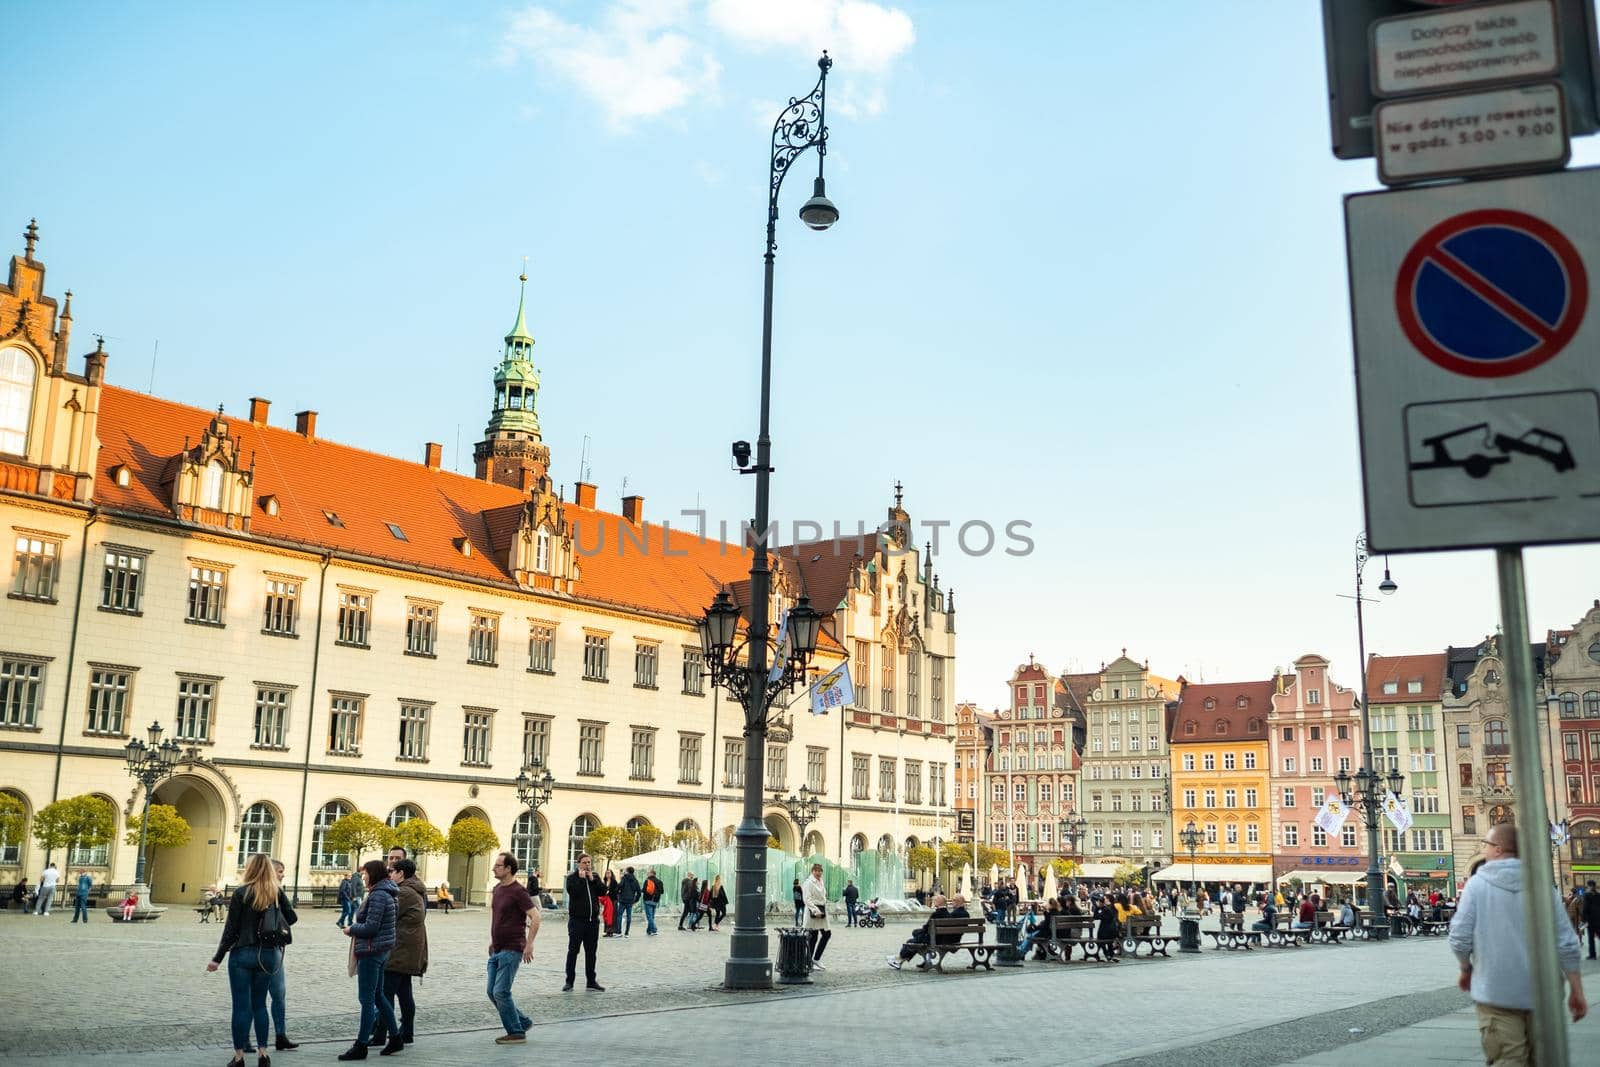 WROCLAW, POLAND-April 8, 2019: View of the Market Square in the Old Town of Wroclaw. Wroclaw is the historical capital of Lower Silesia.